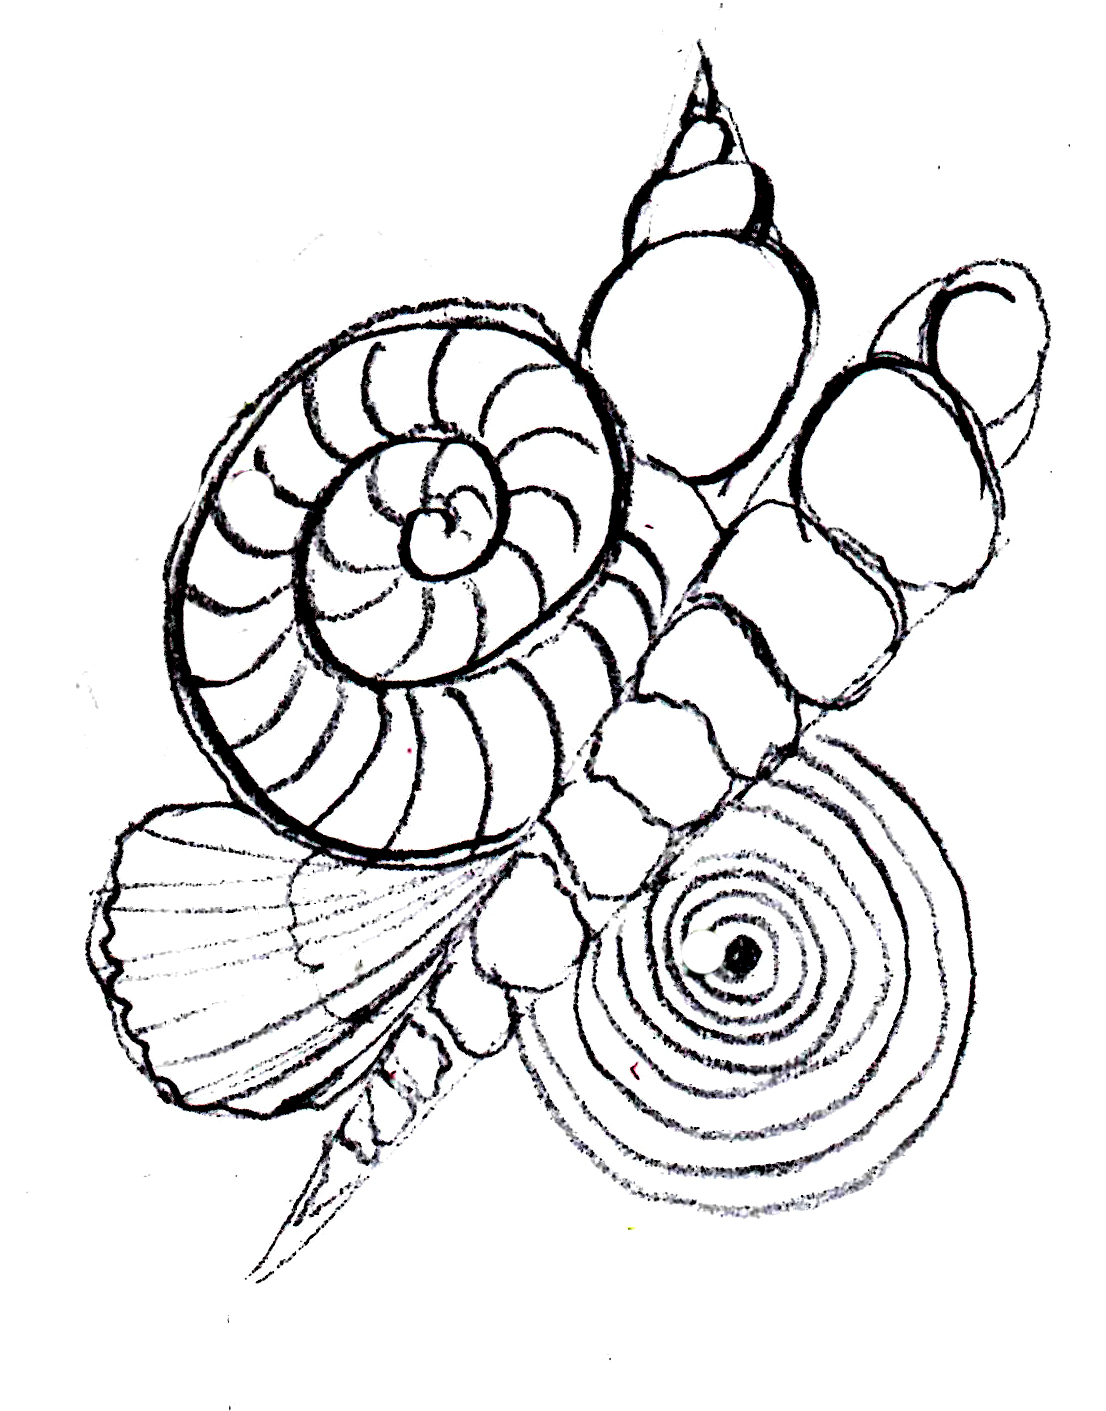 Best Photos of Sea Shell Drawing - Cartoon Sea Shell Drawings, How ...